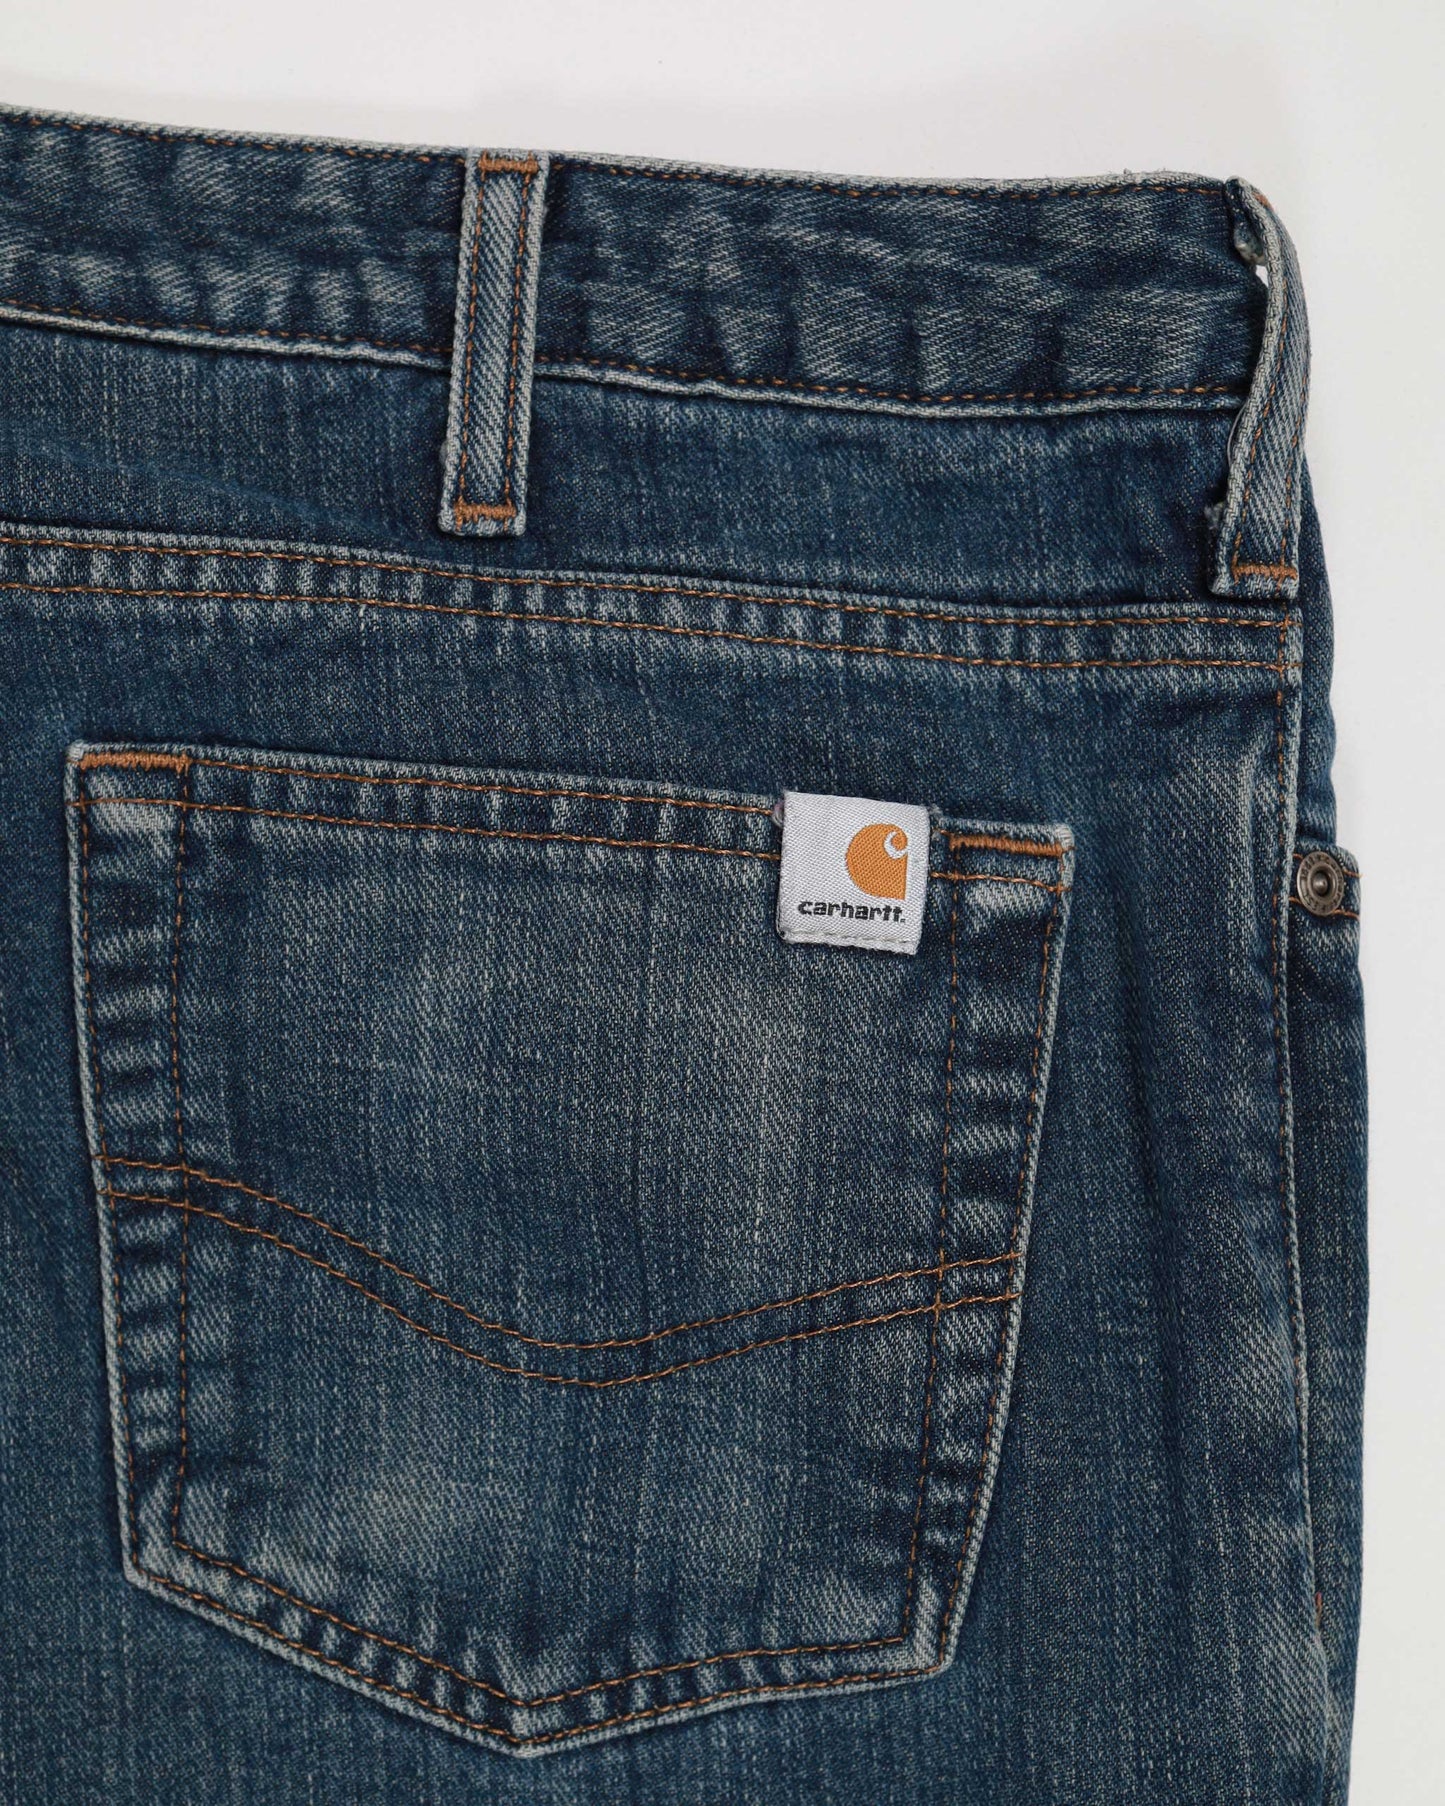 Carhartt Low Waist Relaxed Fit Lining Jeans in Blue W31